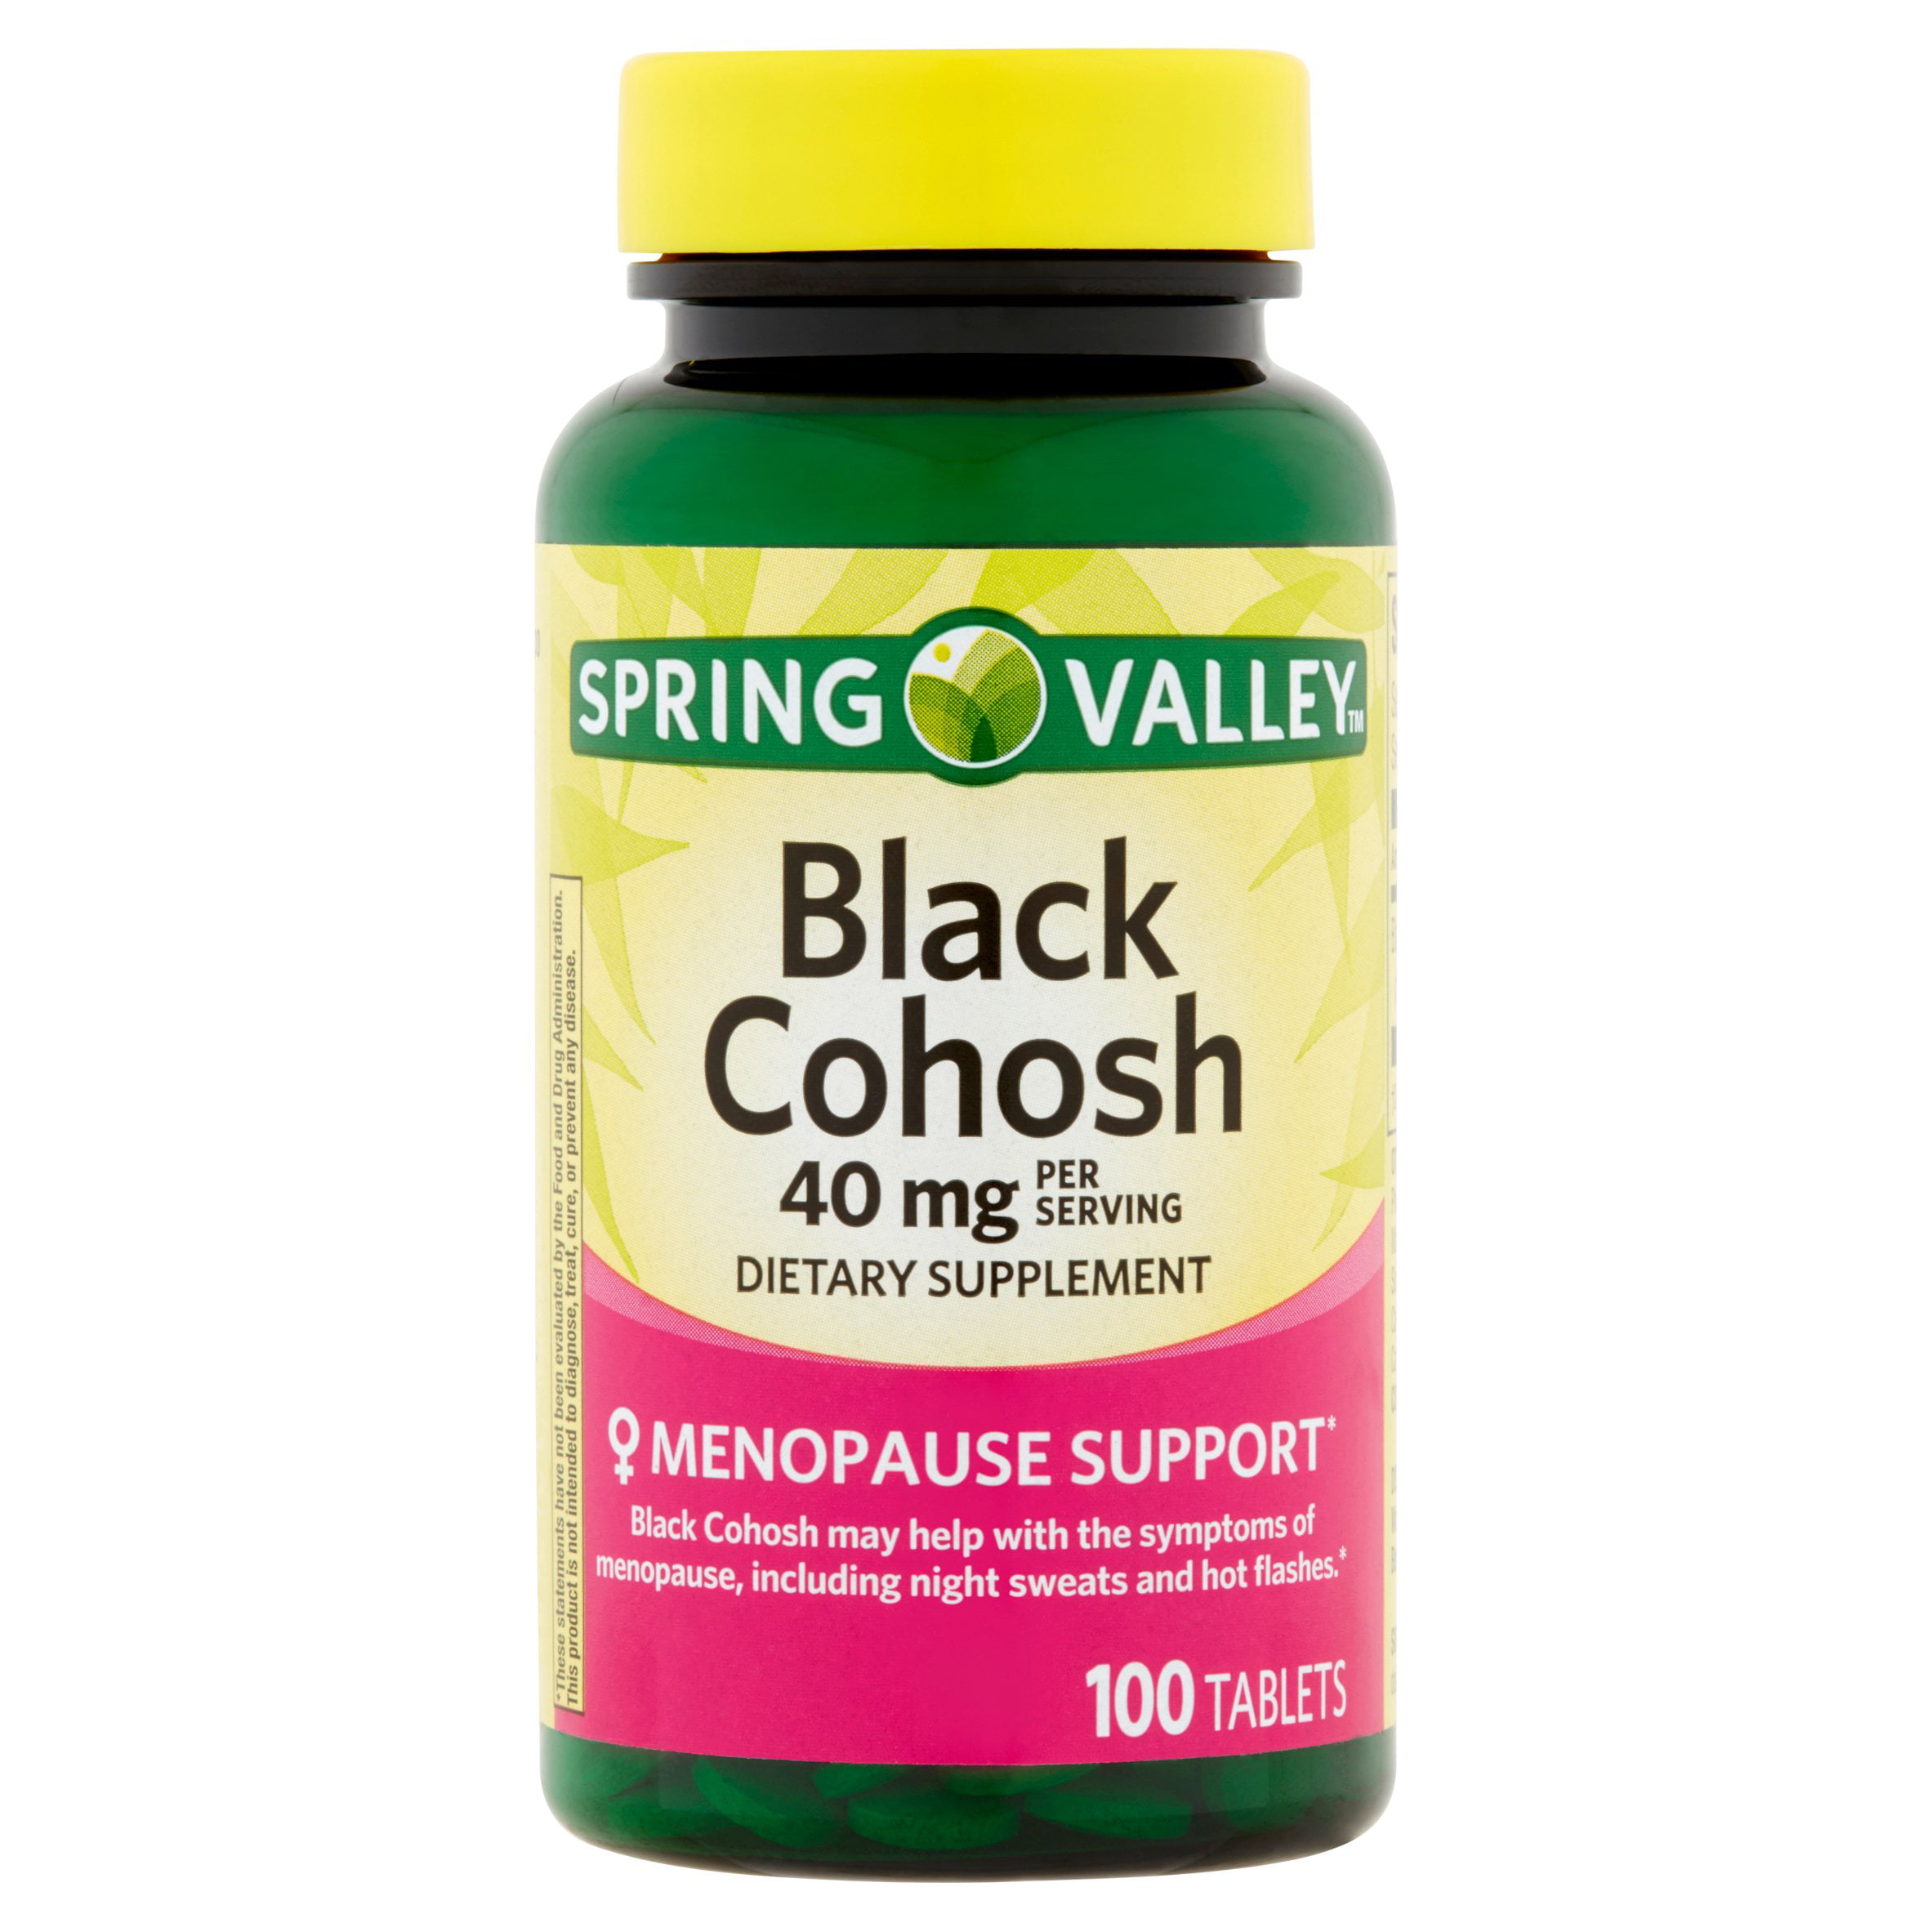 Is black cohosh effective for treating menopause symptoms?